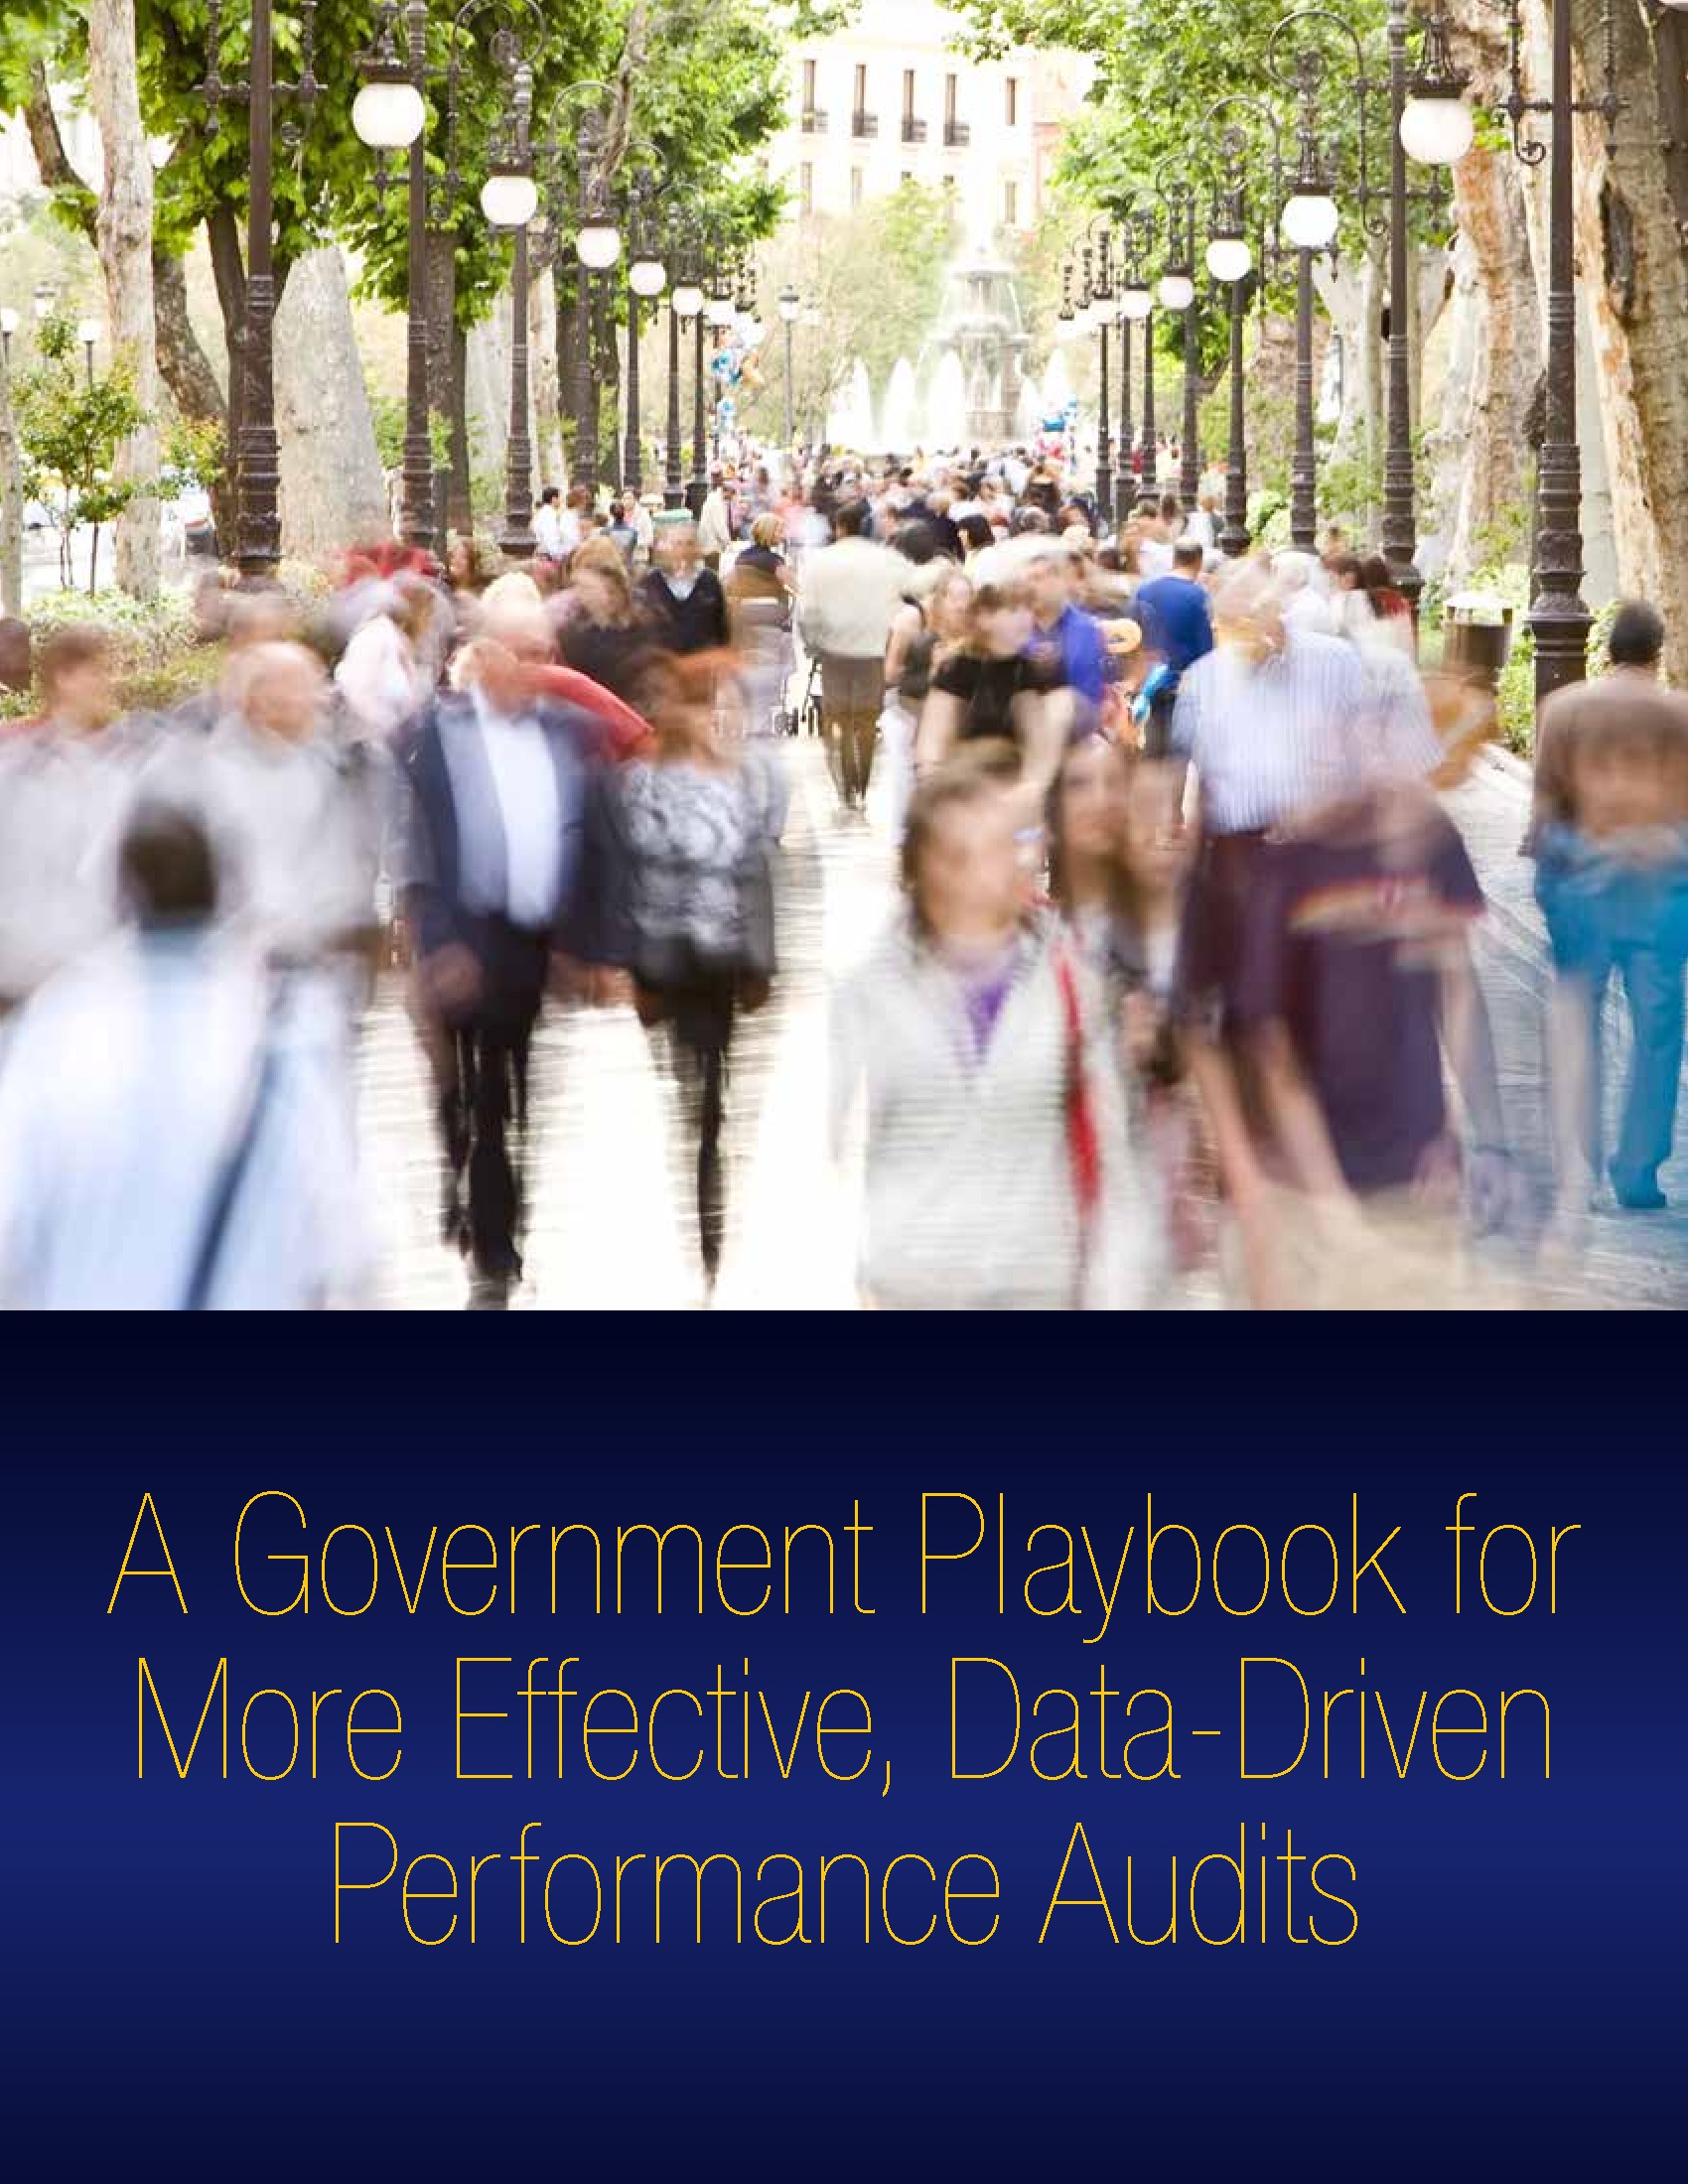 A Government Playbook for More Effective, Data-Driven Performance Audits